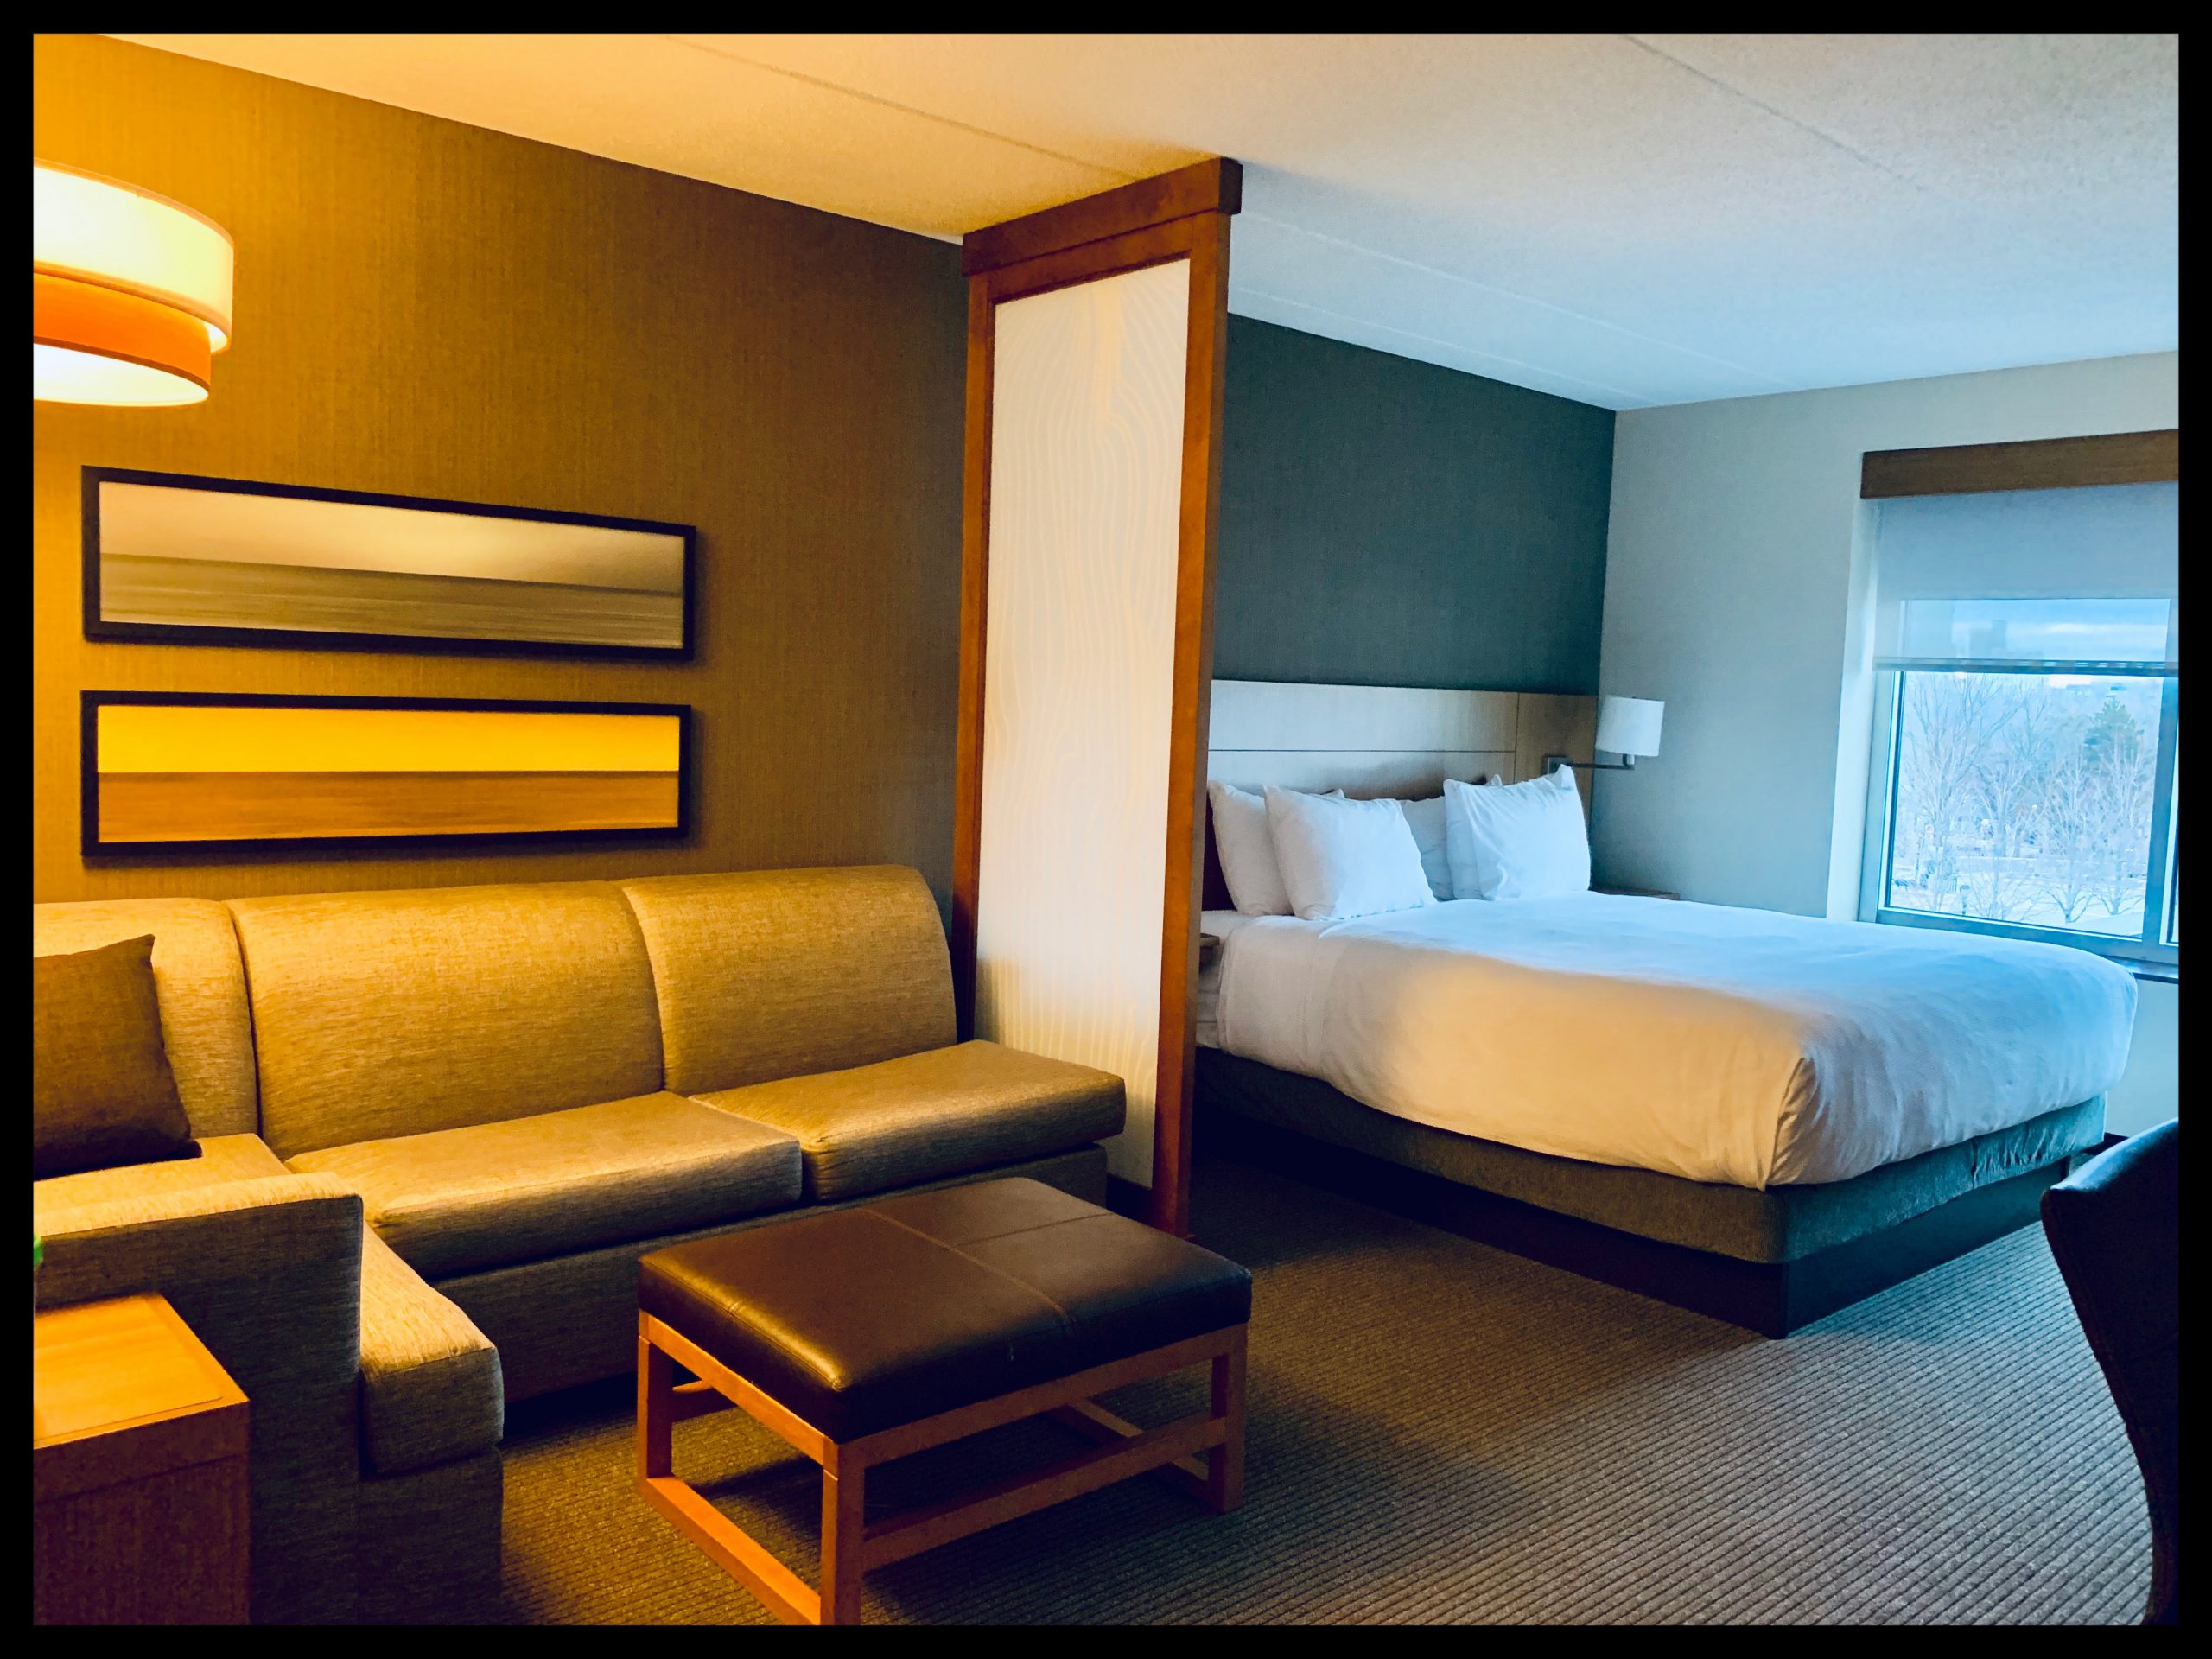 Hotel room with King size bed and couch/seating area